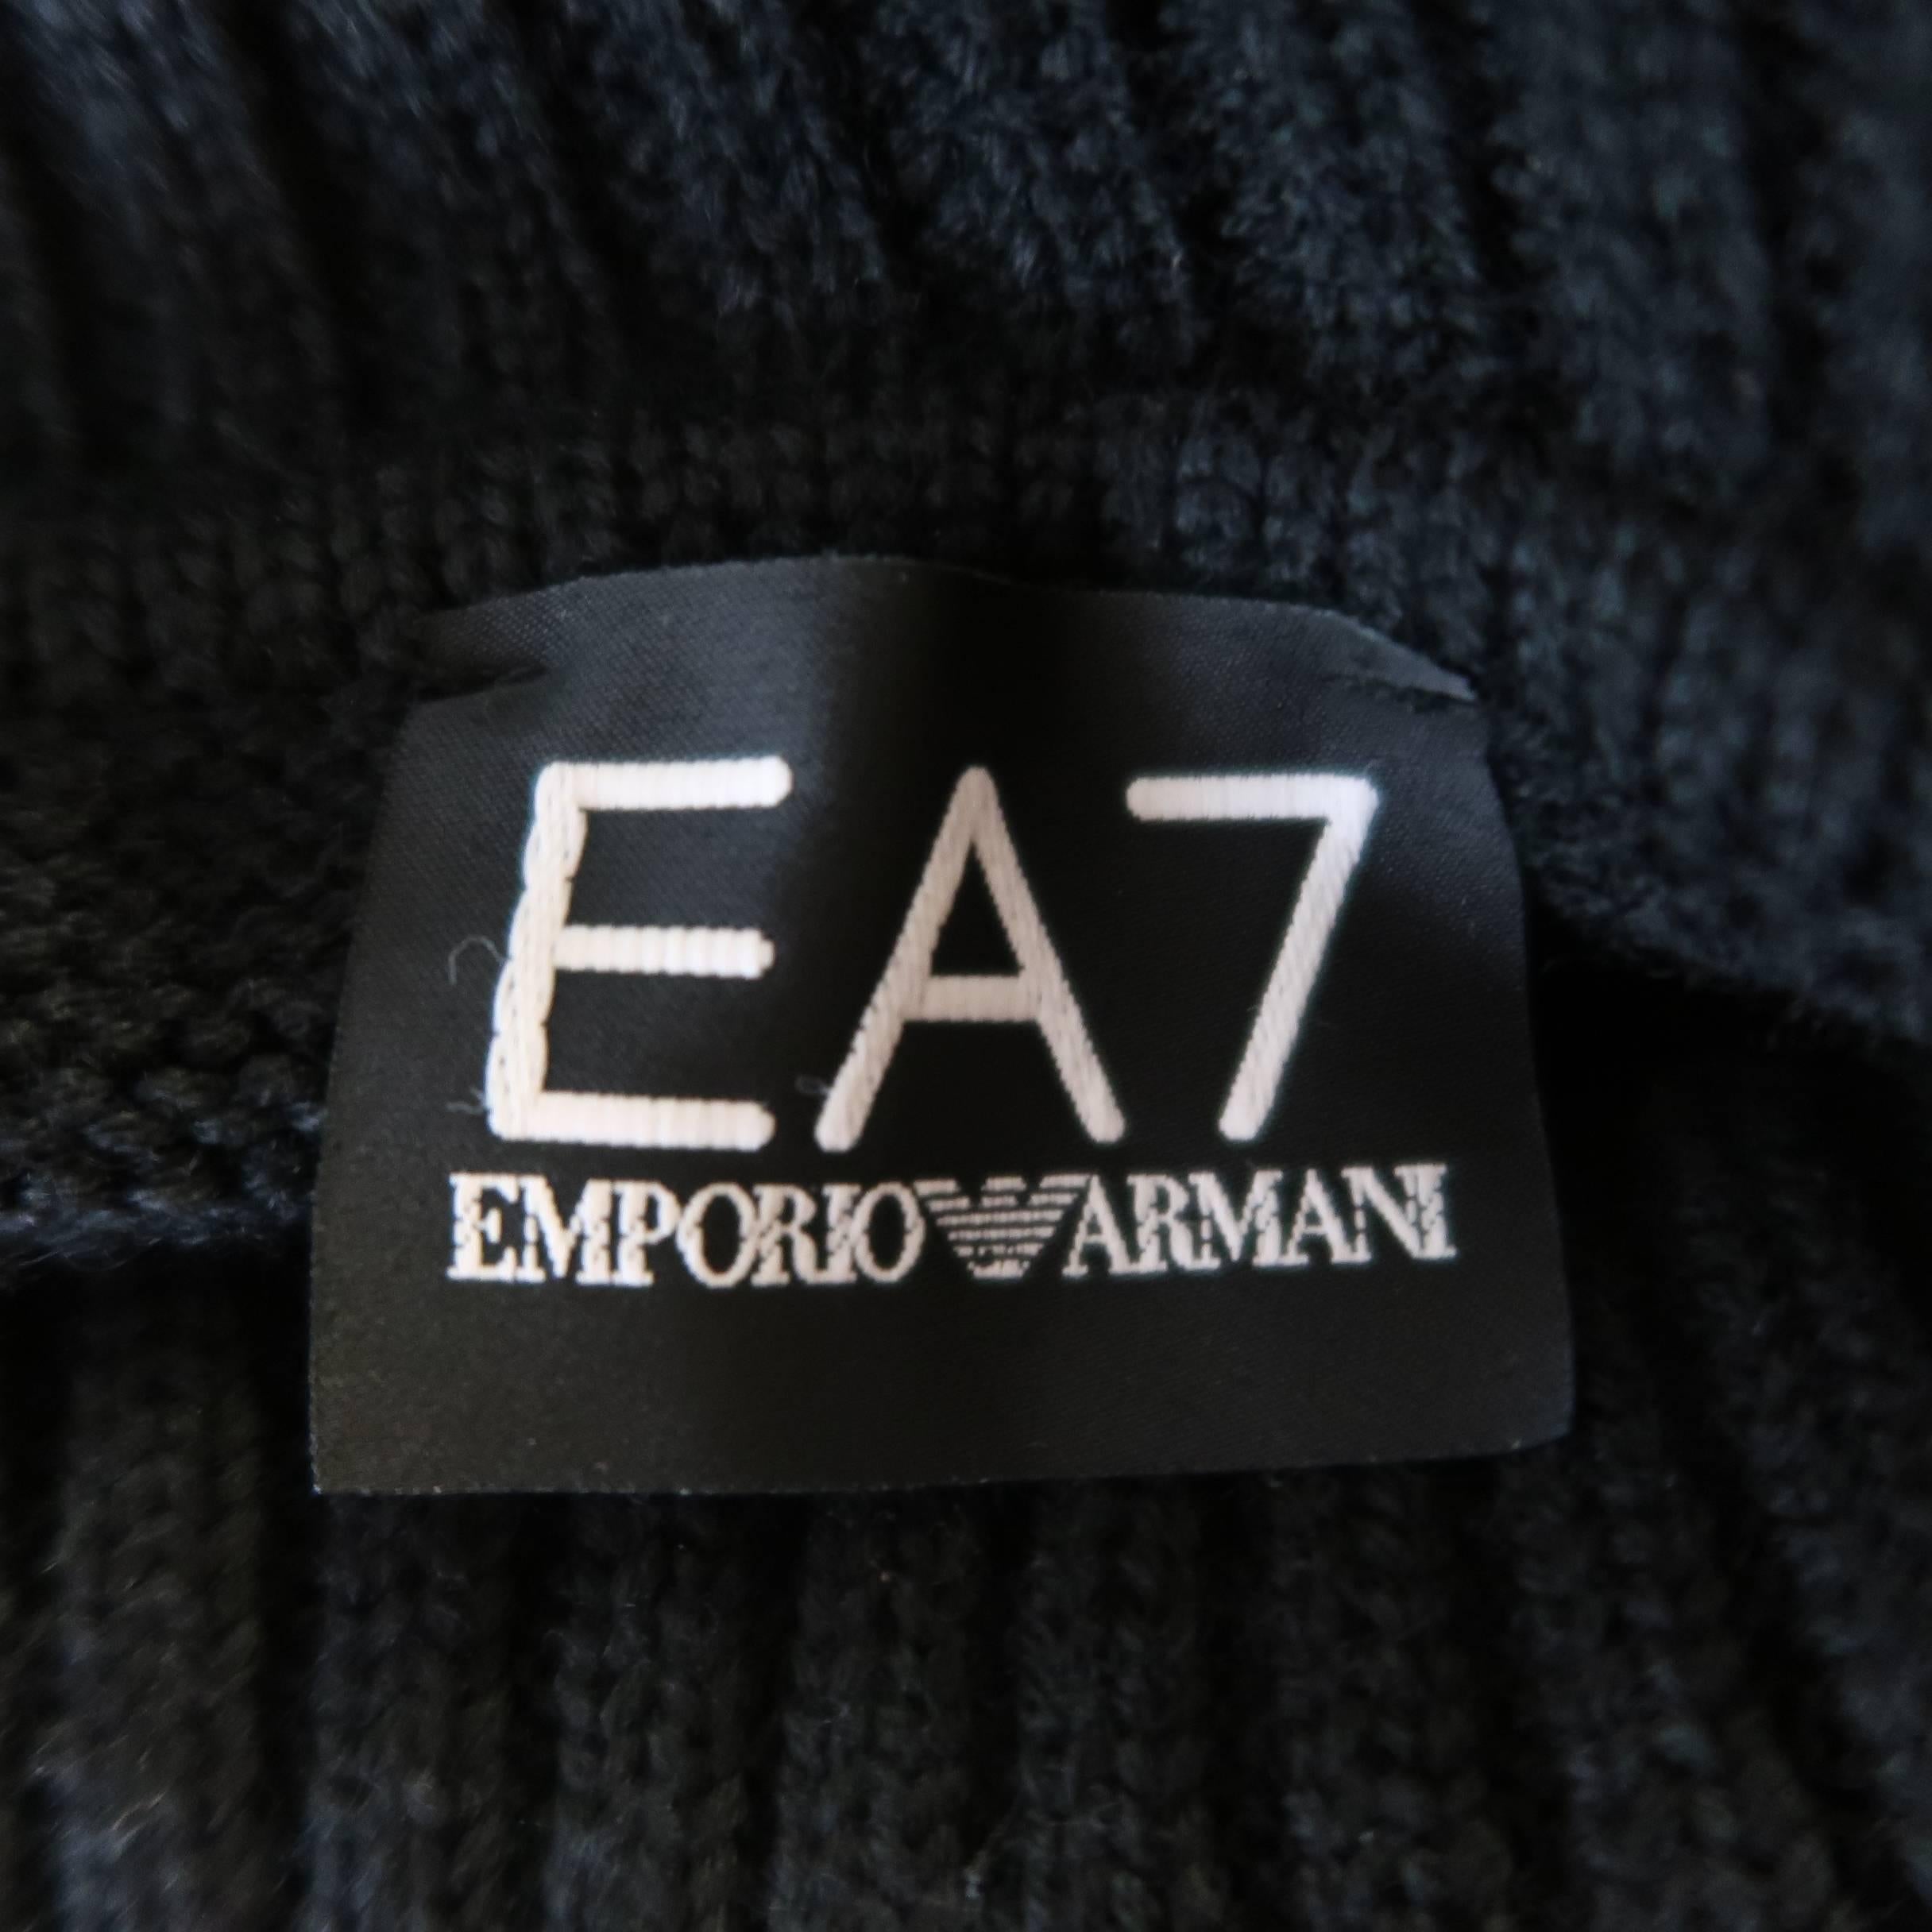 EMPORIO ARMANI EA7 S Black & Yellow Embroidered Wool Blend Turtleneck Sweater 5